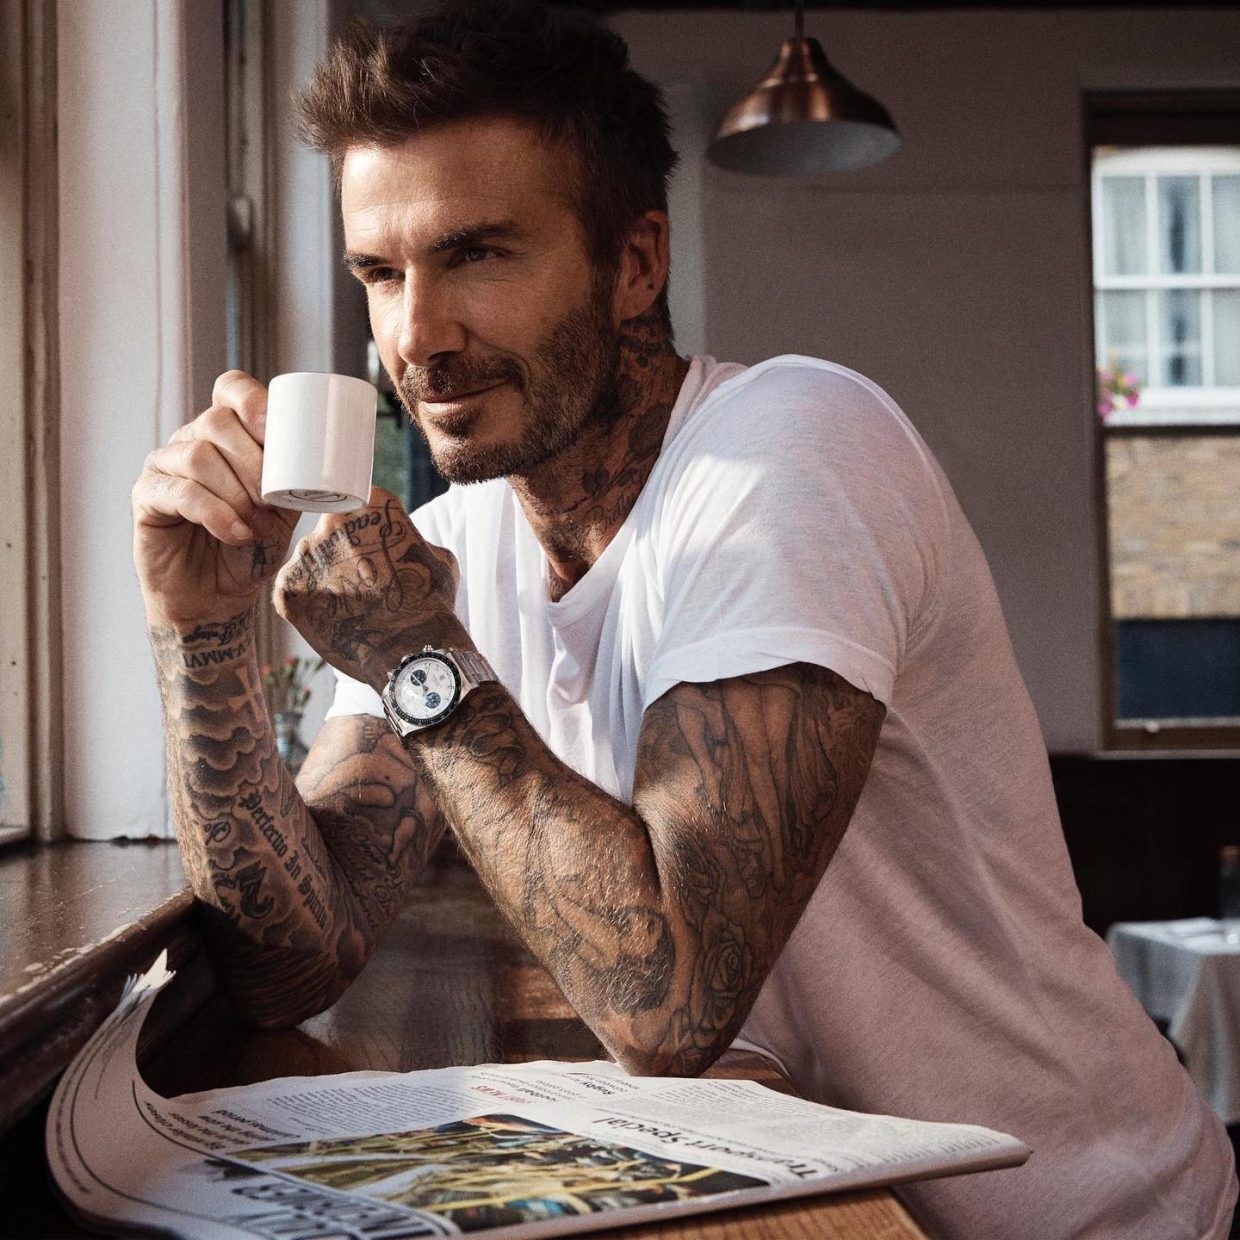 Net Worth Of David Beckham And Expensive Things He Owns